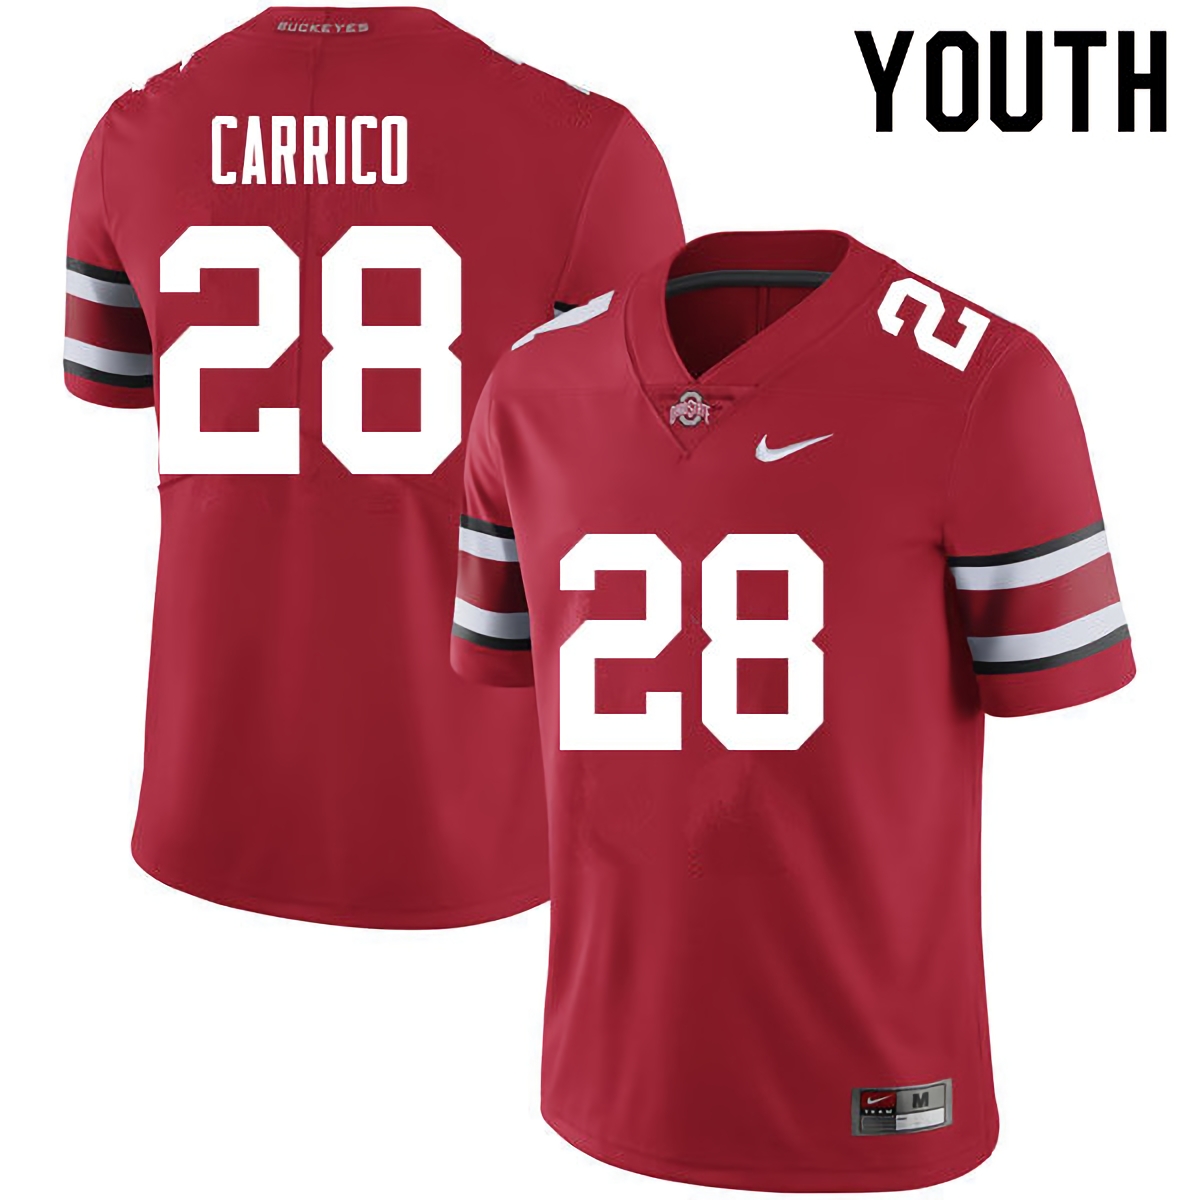 Reid Carrico Ohio State Buckeyes Youth NCAA #28 Red College Stitched Football Jersey HWC1056FL